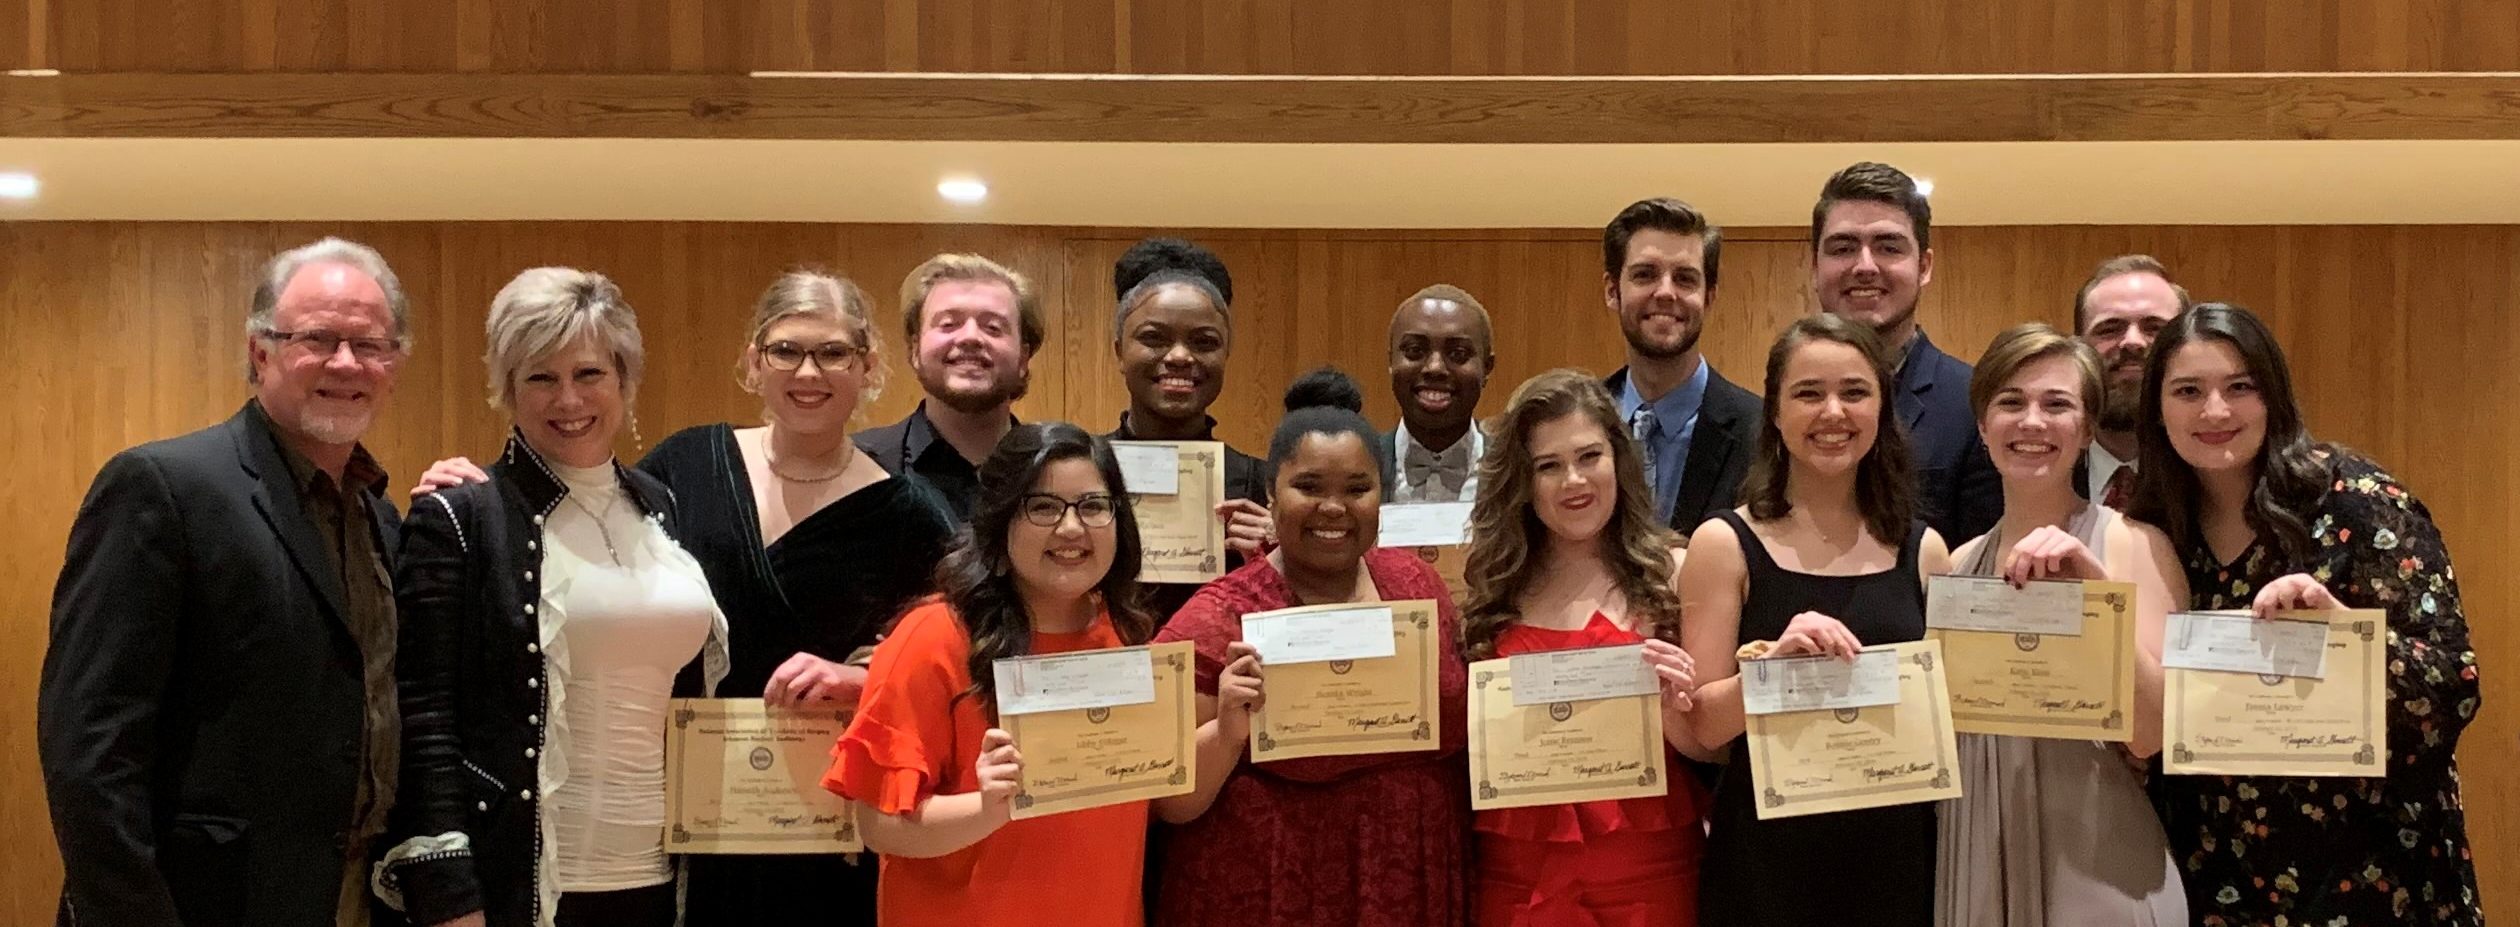 Ouachita hosted the 2019 Arkansas National Association of Teachers of Singing competition (NATS) Feb. 22-23 and earned 18 finalist honors. Six Ouachita students received first place honors.